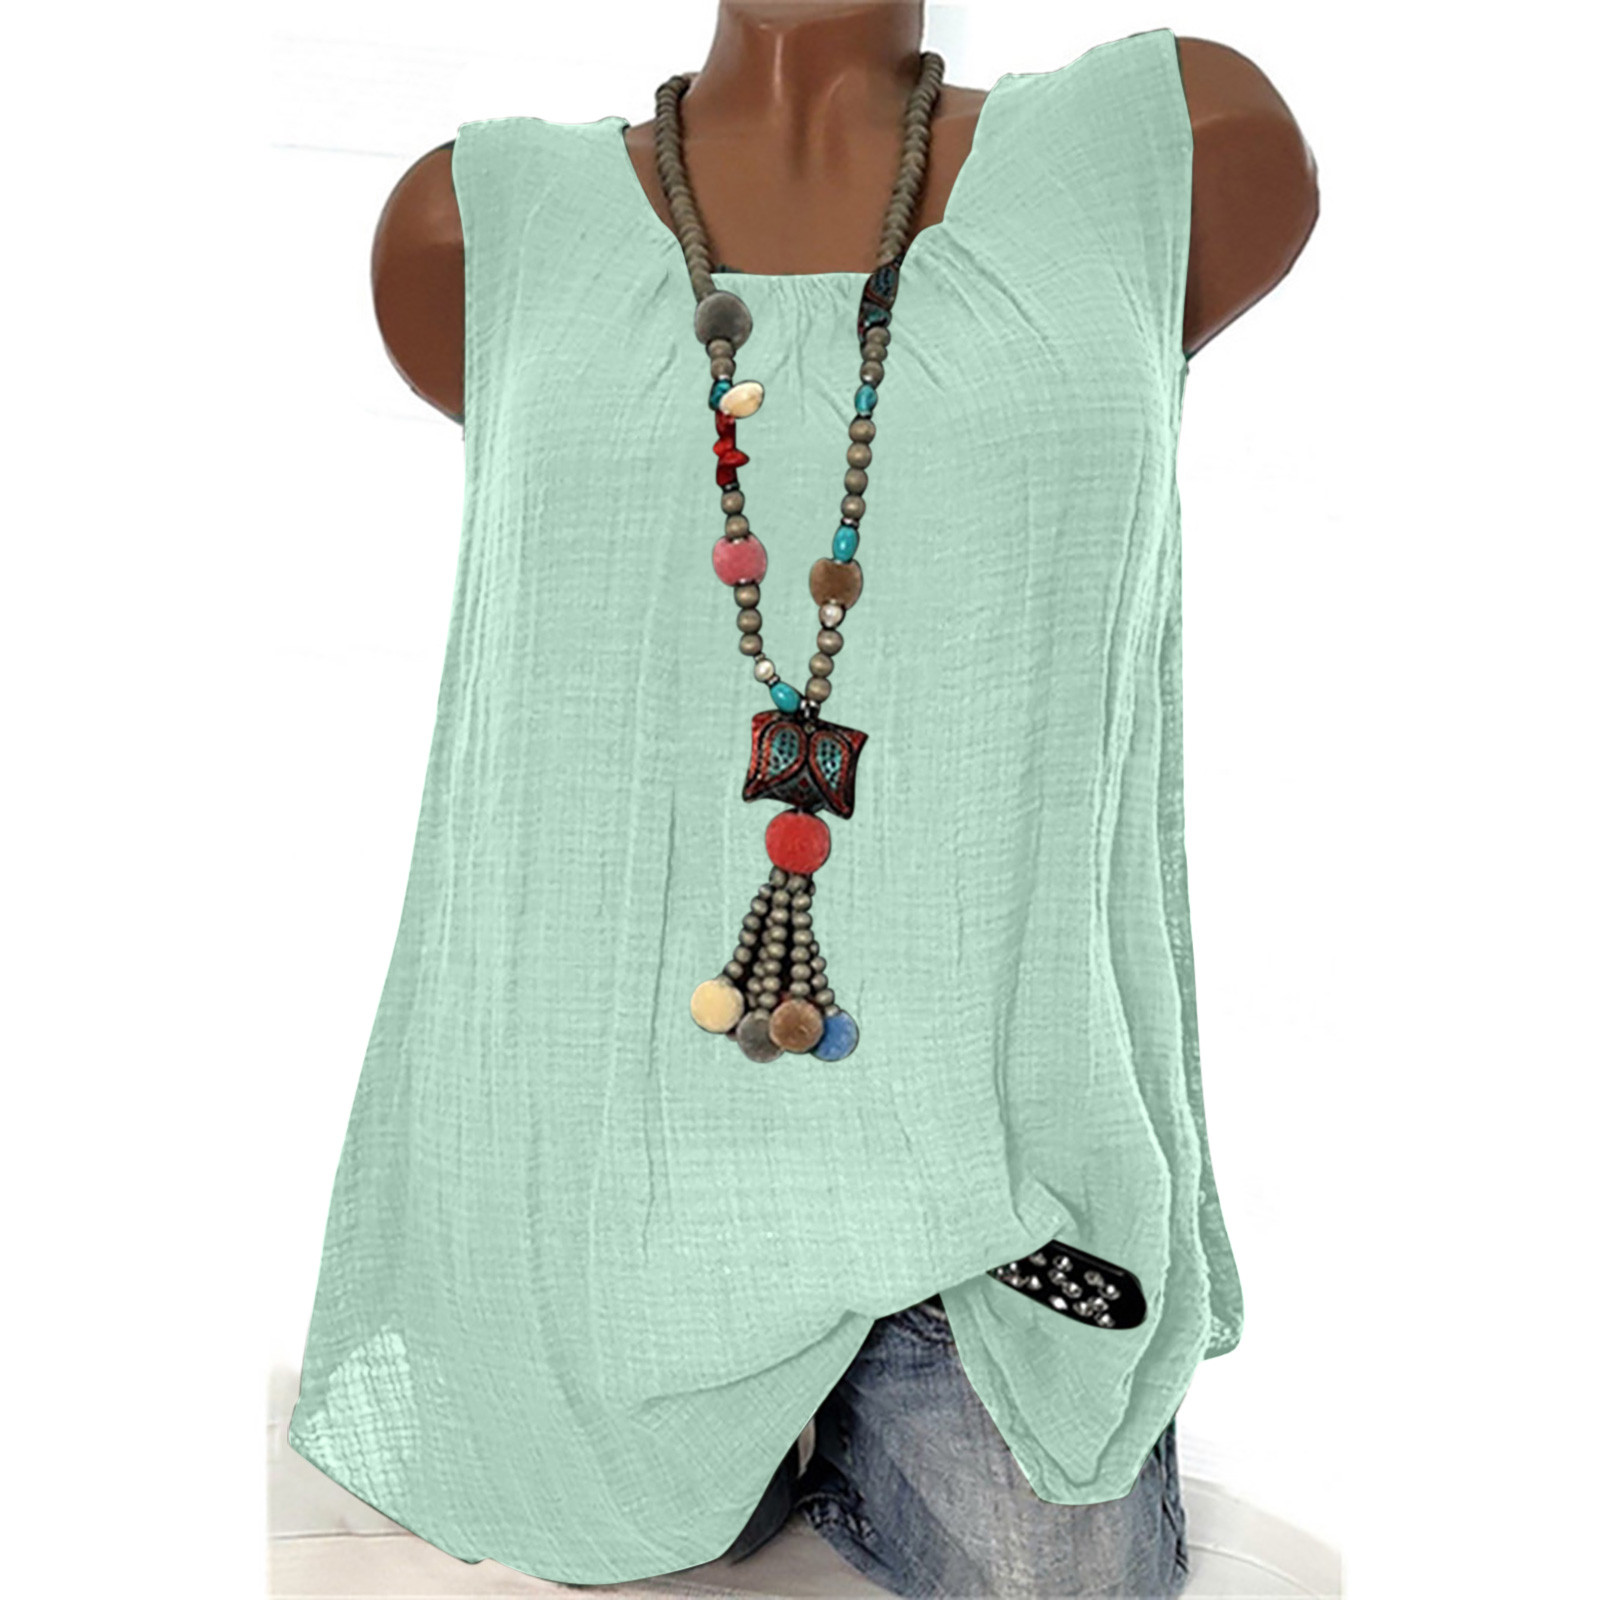 Brilliant Tank Tops for Women Plus Size 3x Women's Summer Solid Color ...